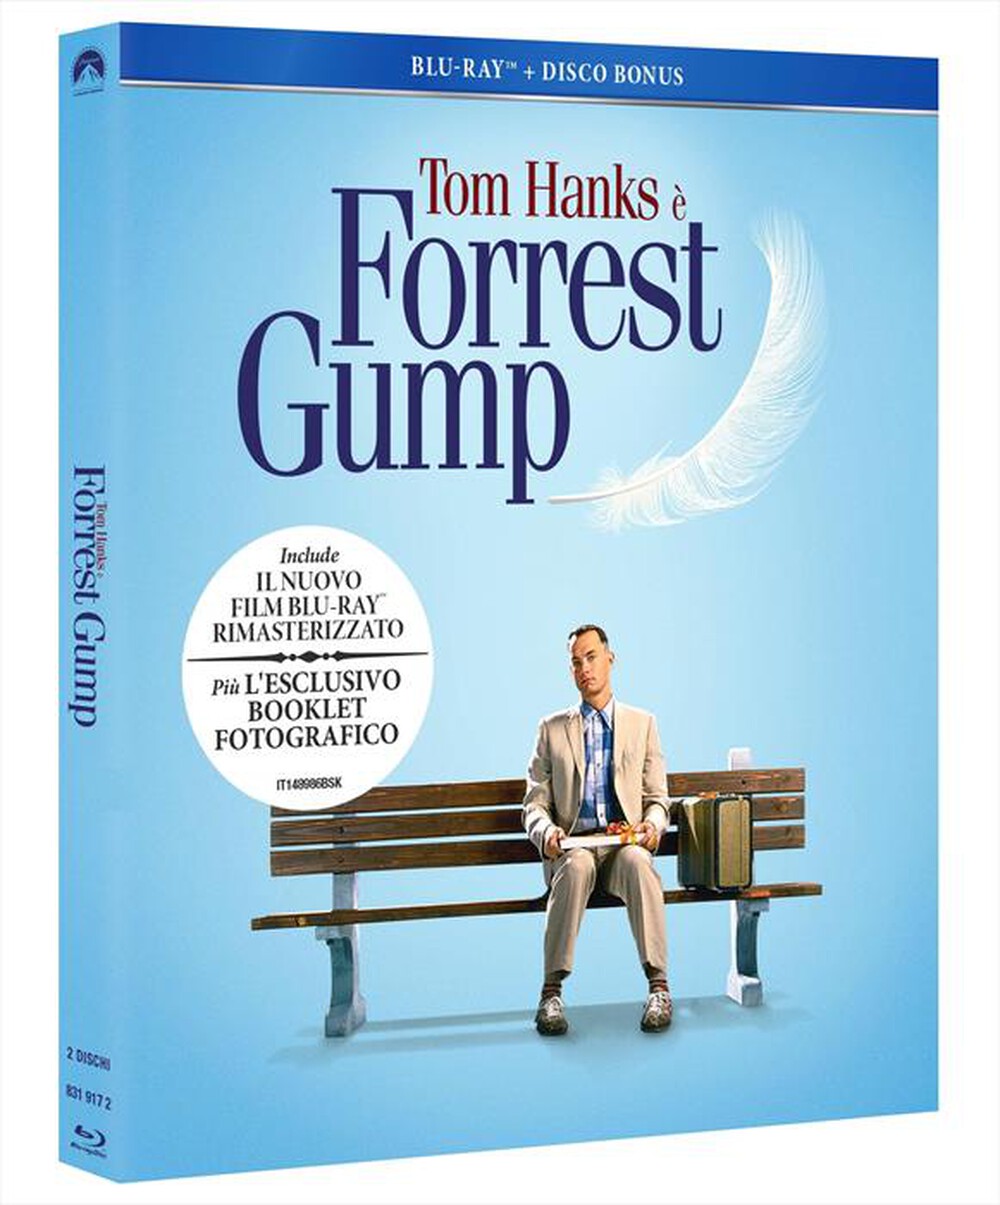 "Paramount Pictures - Forrest Gump 25Th Anniversary"